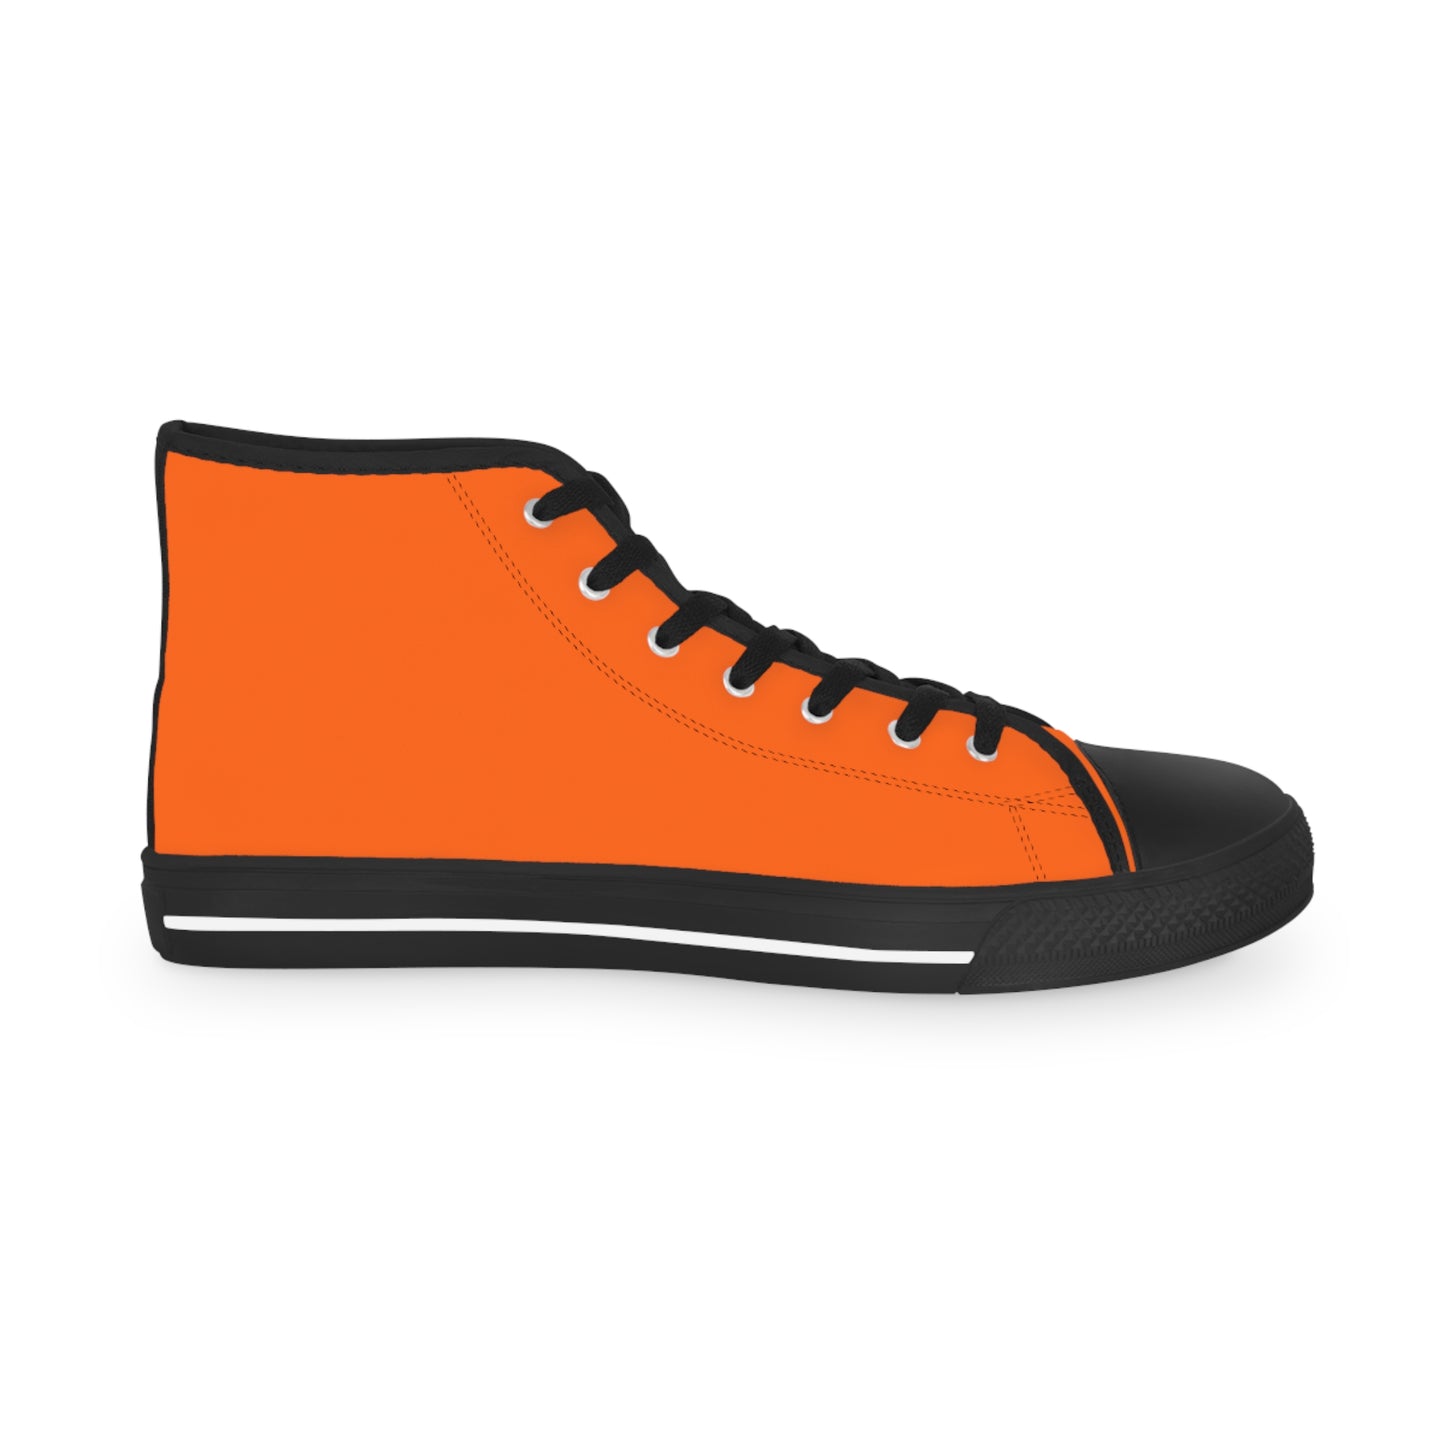 Men's Canvas High Top Solid Color Sneakers - Electric Orange US 14 White sole